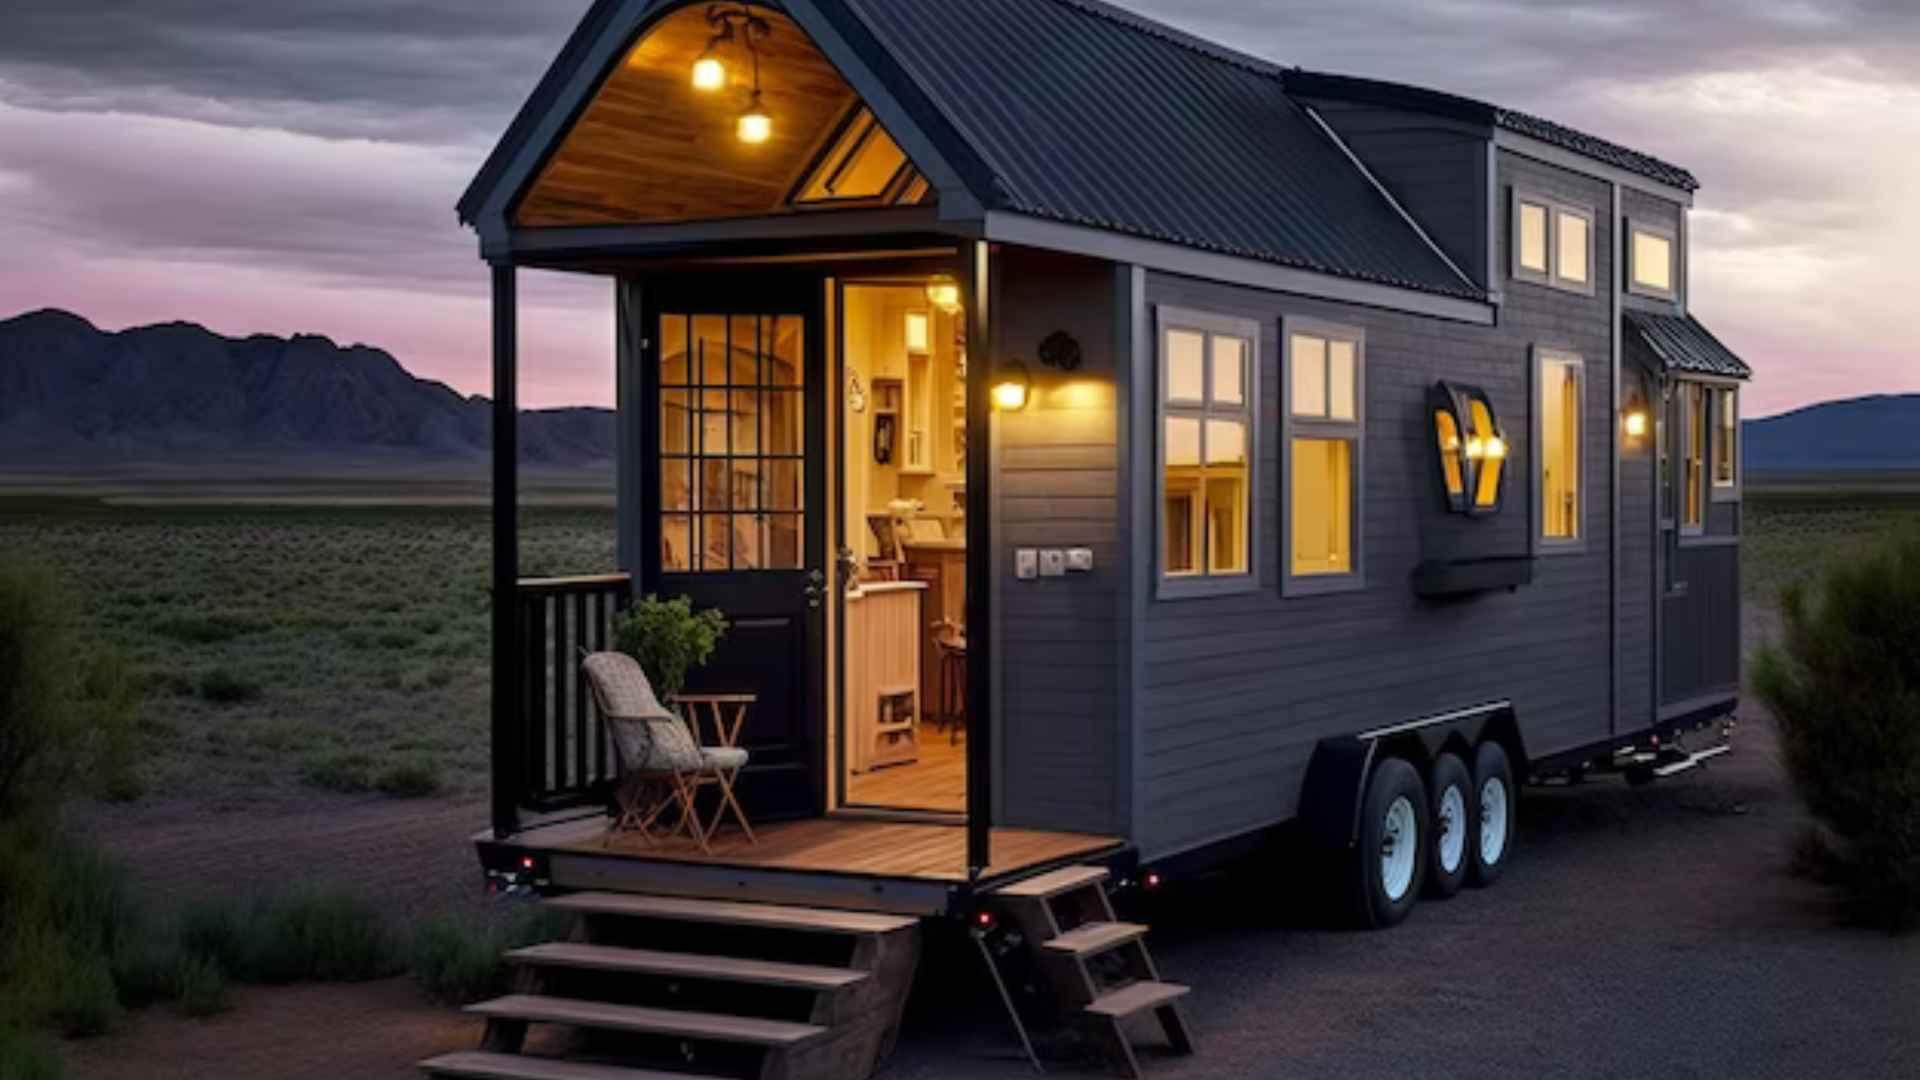 What are the pros and Cons of buying a mobile home?